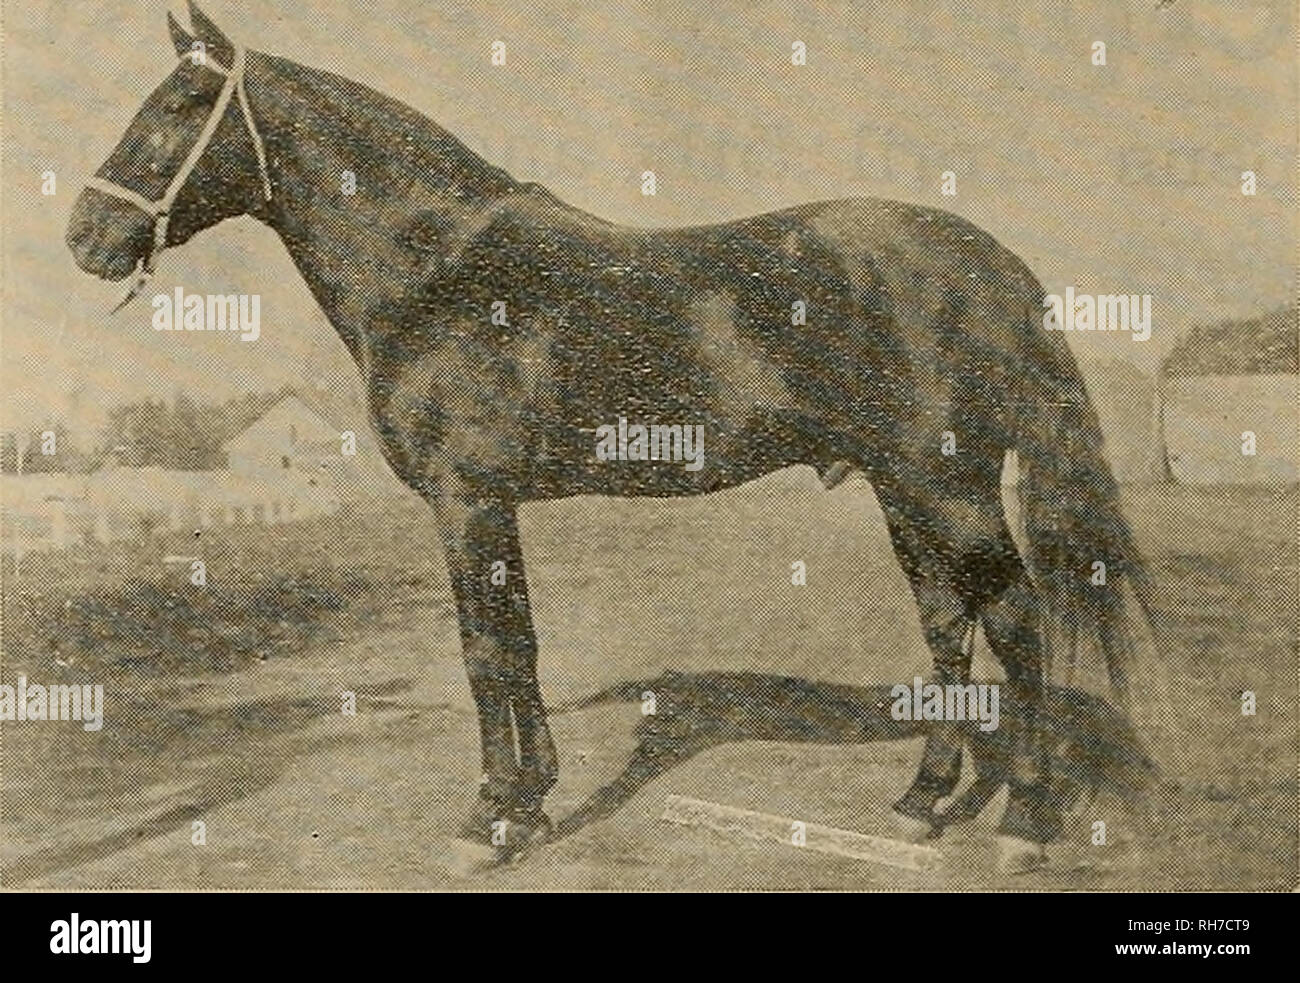 . Breeder and sportsman. Horses. 446 Â©in* gtaegttev mtfr ^piwt#Â»timÂ» [December 30, 1899 DIRECT Ml-2 SIRE OF -*. Directum Kelly,2:08 1-4 Directly - - - 2:031-1 Miss Margaret - 2:111-2 Ed B. Young - - 2:111-4 I Direct - - - - 2:13 Miss Beatrice - 2:13 1-4 And 13 titer Standard Trotters and Pacers Terms, $100 the Season Is now io tbe stud at KEHISS'S STABILES at Pleasanton, California track. Excellent pasturage and the best of care taken of mares in any manner that owners ^may desire at reasonable rates. Apply to THOMAS E.KEATIKG, Pleasanton.Cal-. Western Turf Association TANFORAN PARK Third M Stock Photo